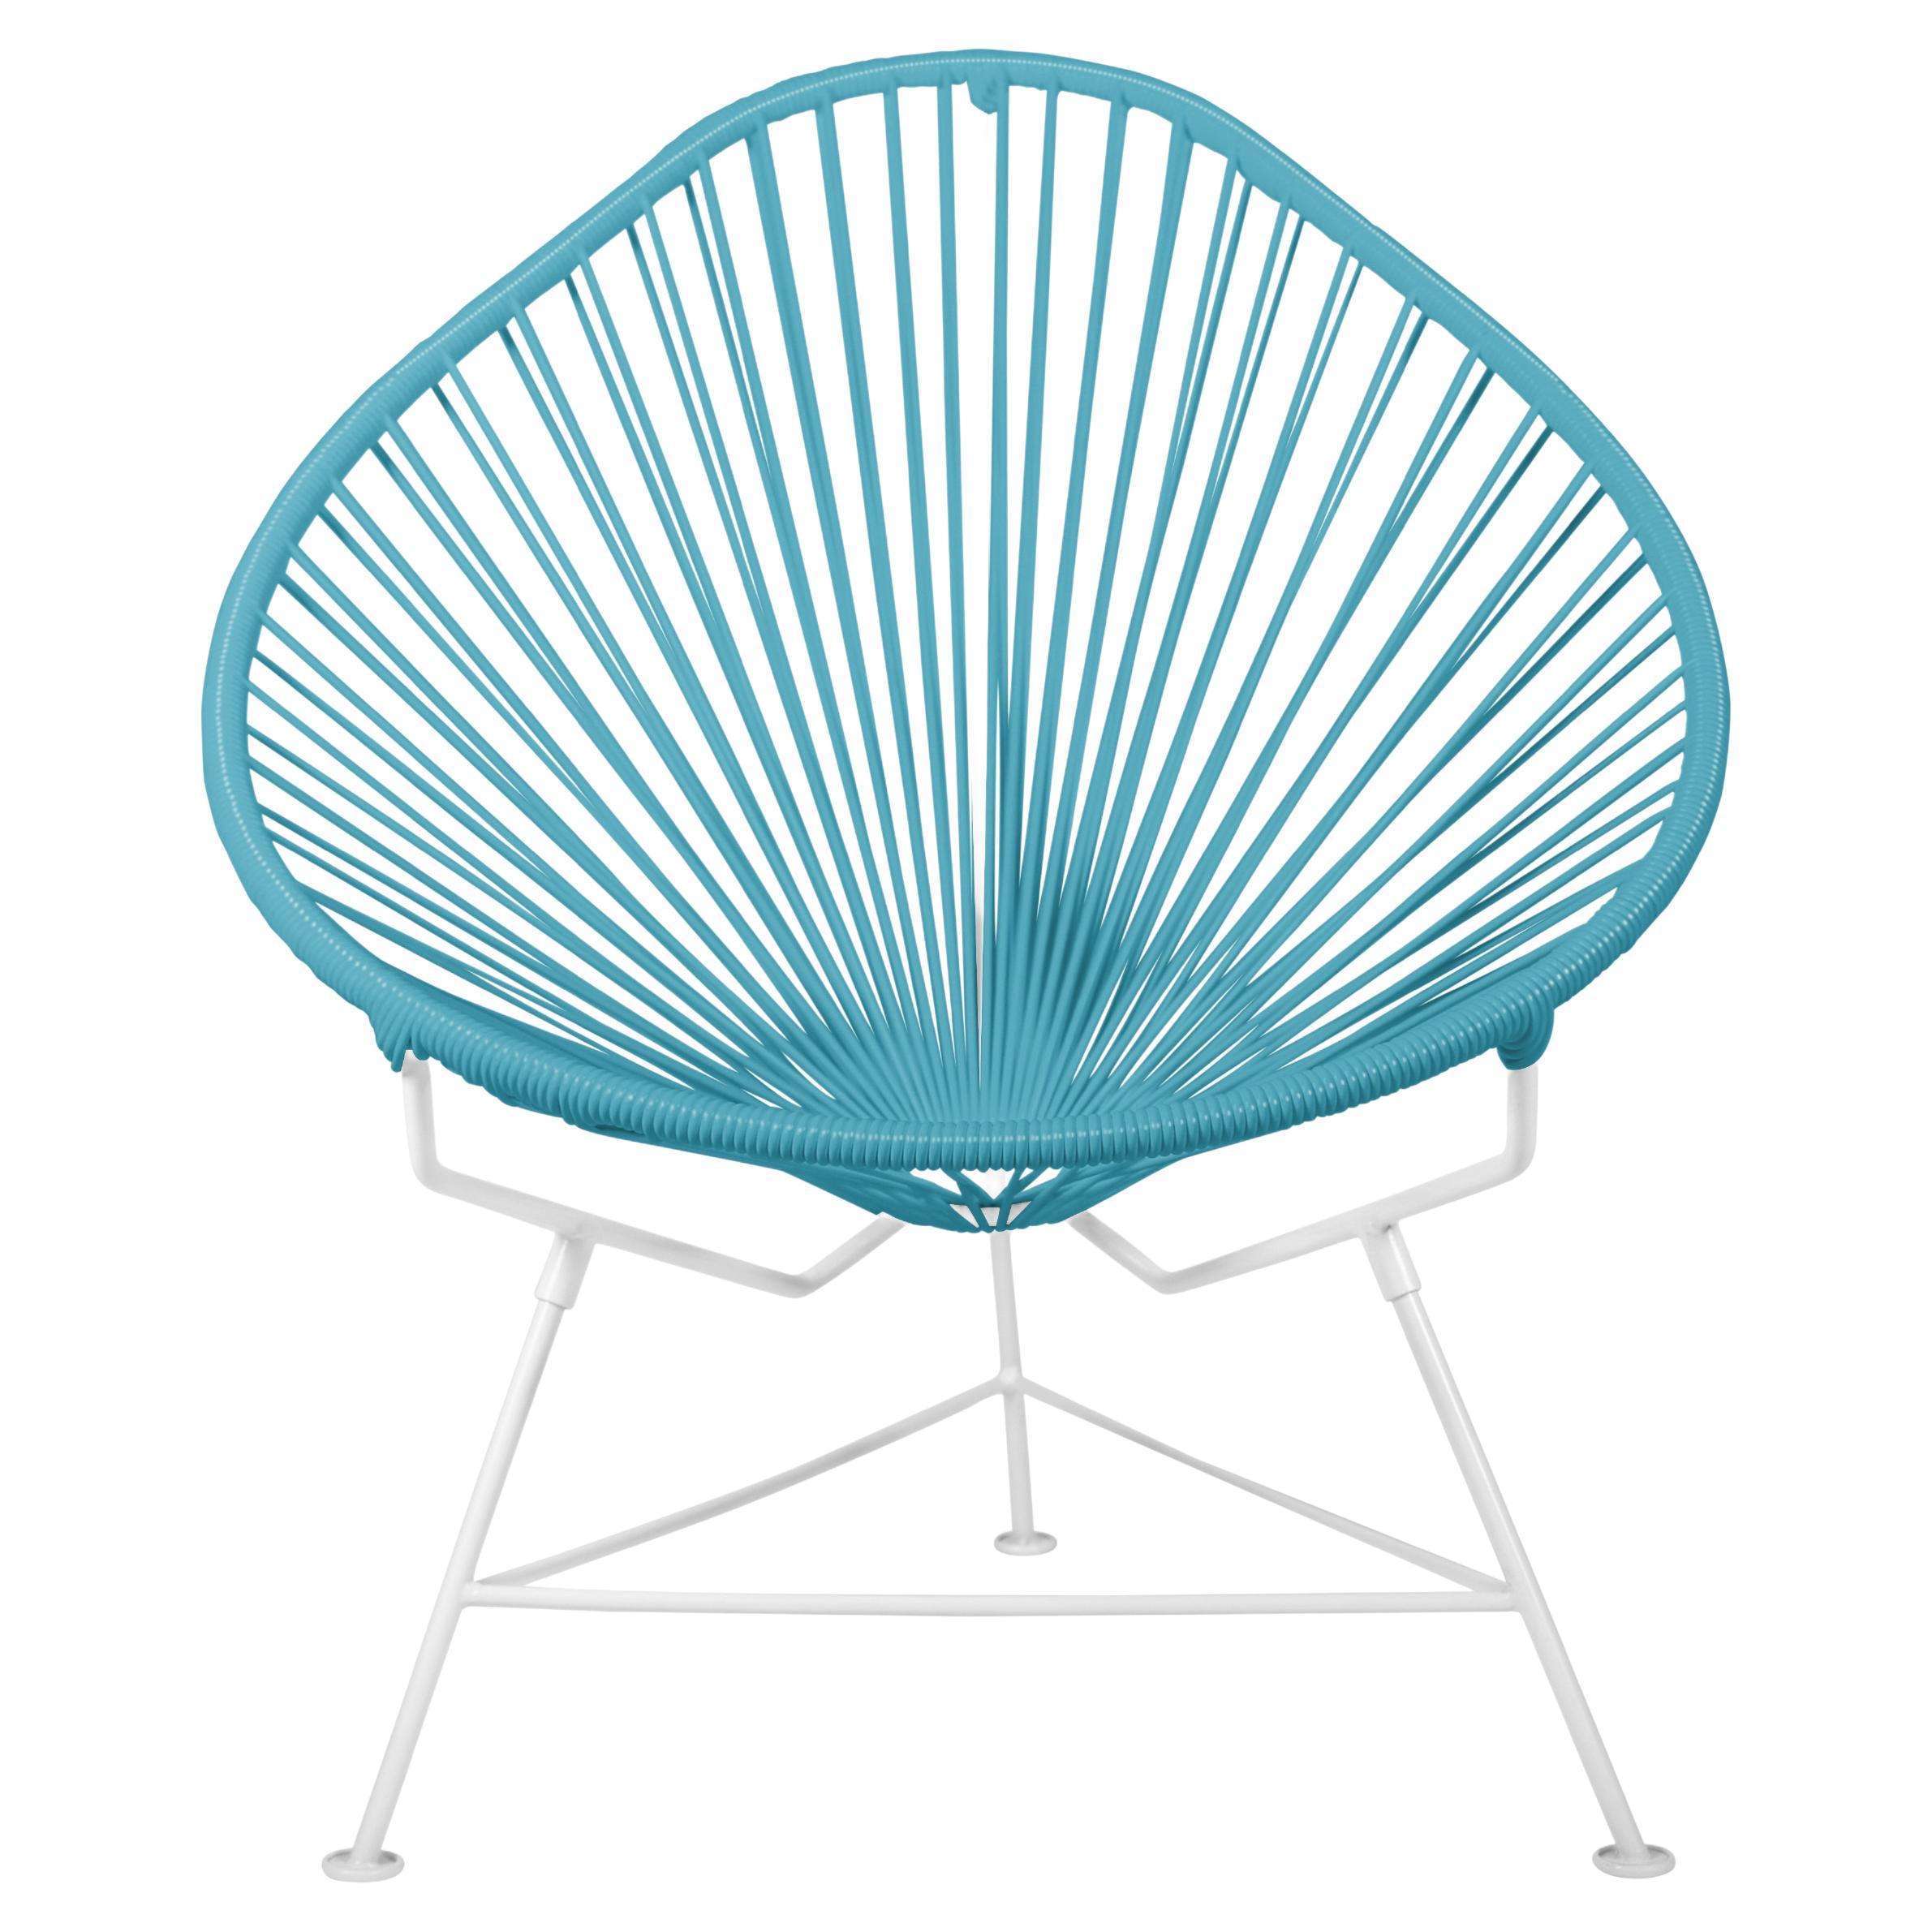 Innit Designs Acapulco Chair Blue Weave on White Frame